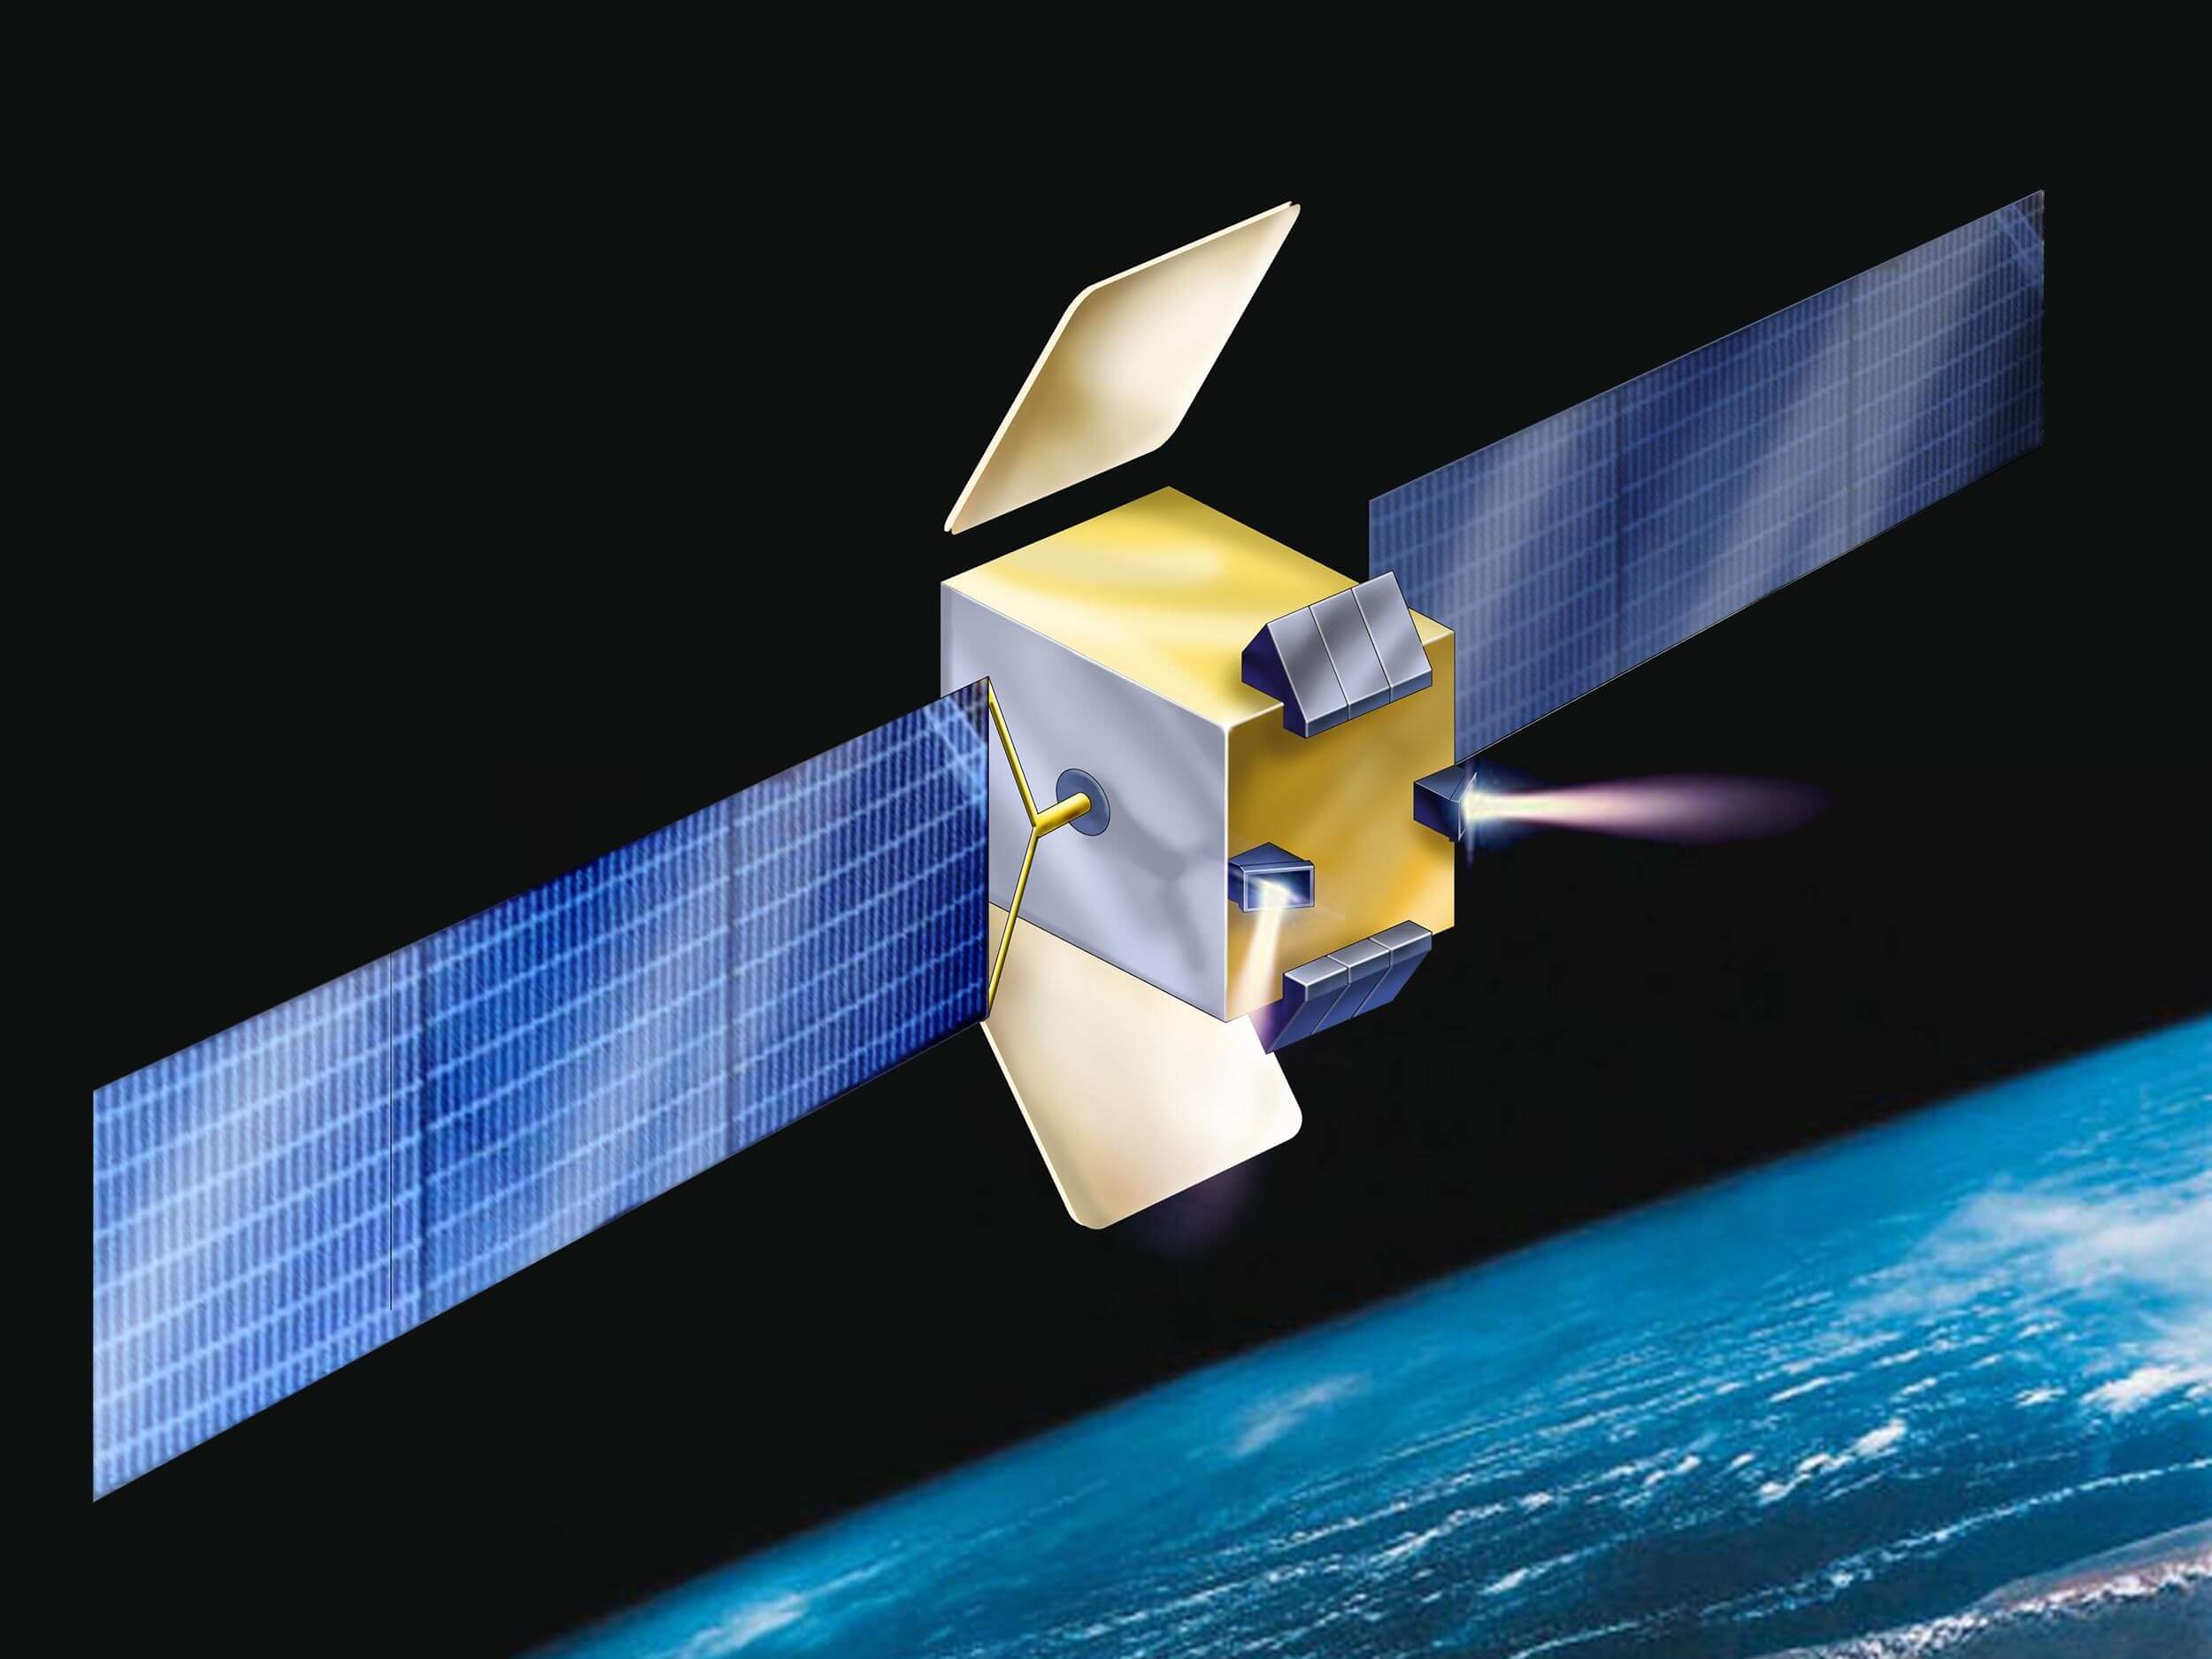 Simulation of the loaded satellite E. Note the nozzles of the propulsion system in the lower part of the satellite. Illustration: The Aerospace Industry